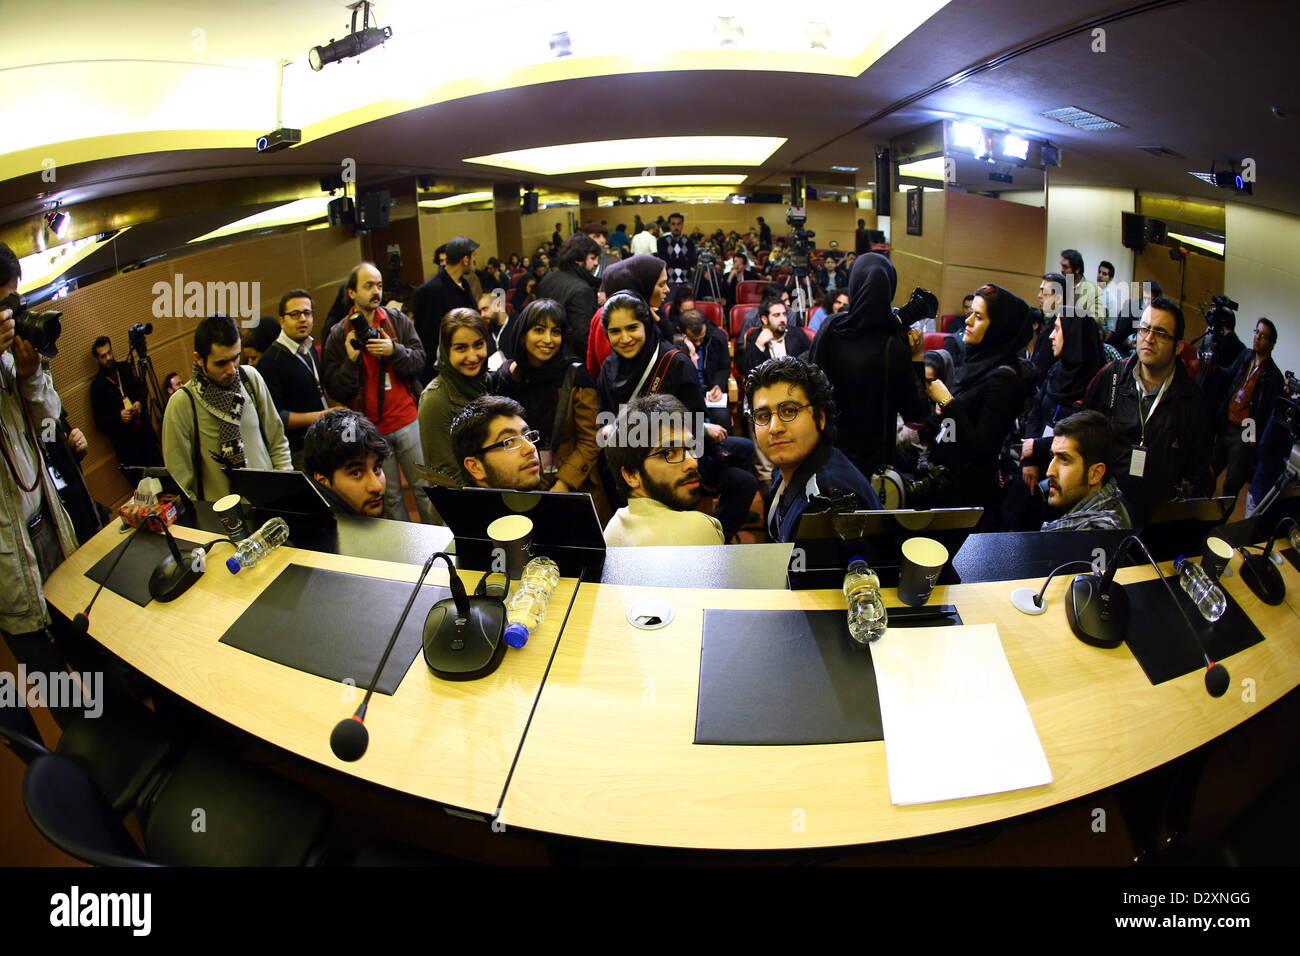 TEHRAN, IRAN: Photographers waiting for a press conference at Day 2 of the 31th International Fajr Film Festival on February 1, 2013 in Tehran, Iran. Organized by the Ministry of Culture and Islamic Guidance, the Film Festival is the most important film event in the country.(Photo by Gallo Images / Amin Mohammed Jamali) Stock Photo